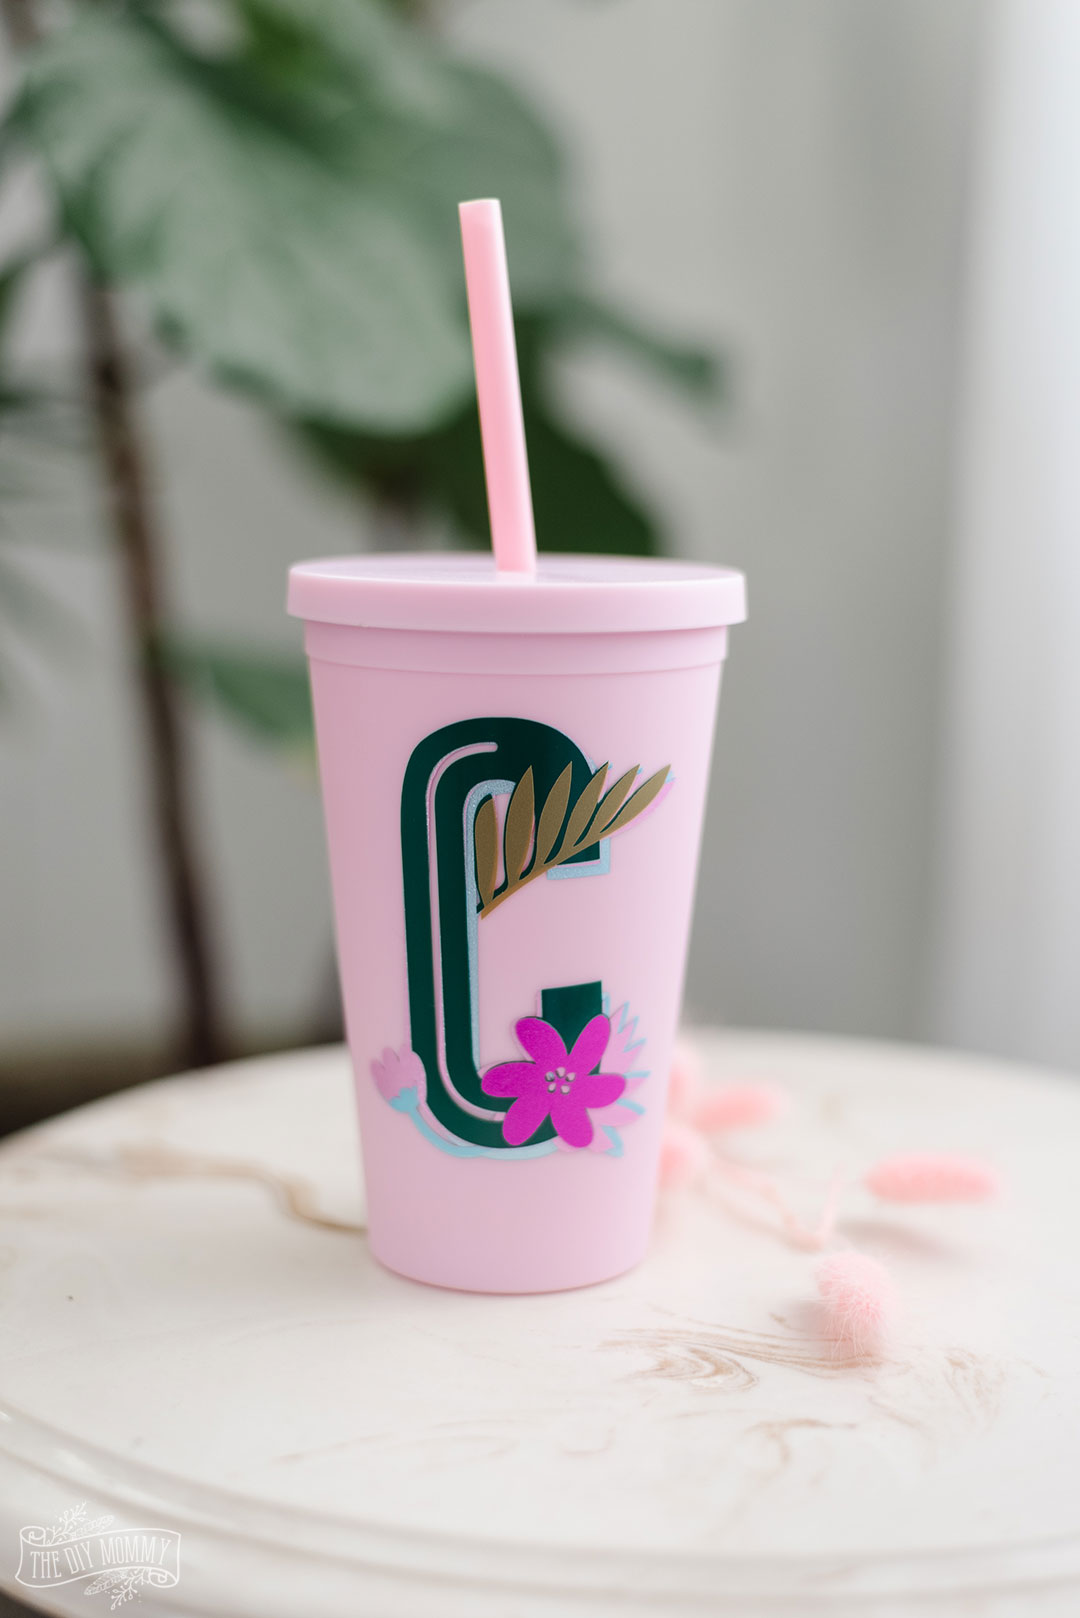 DIY floral monogramed pink tumbler  made using your Cricut machine will make a great Christmas gift.